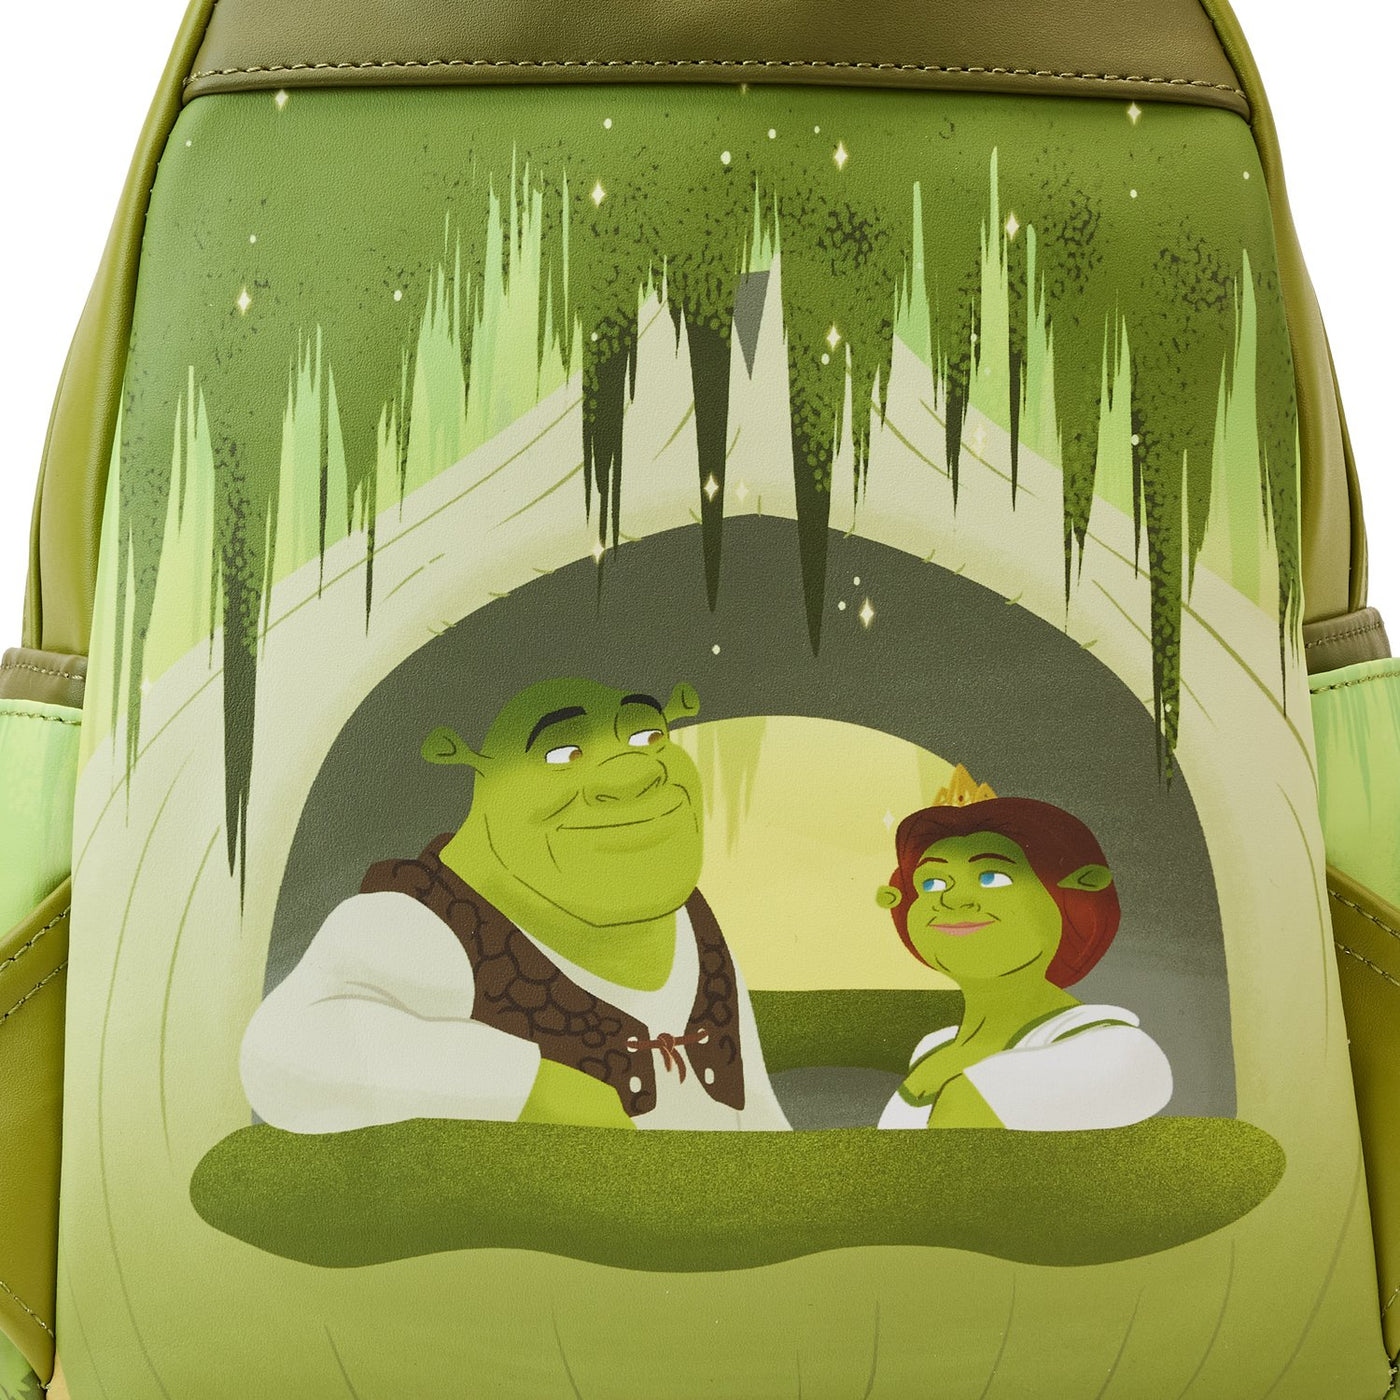 671803392526 - Loungefly Dreamworks Shrek Happily Ever After Mini Backpack - Back Close Up